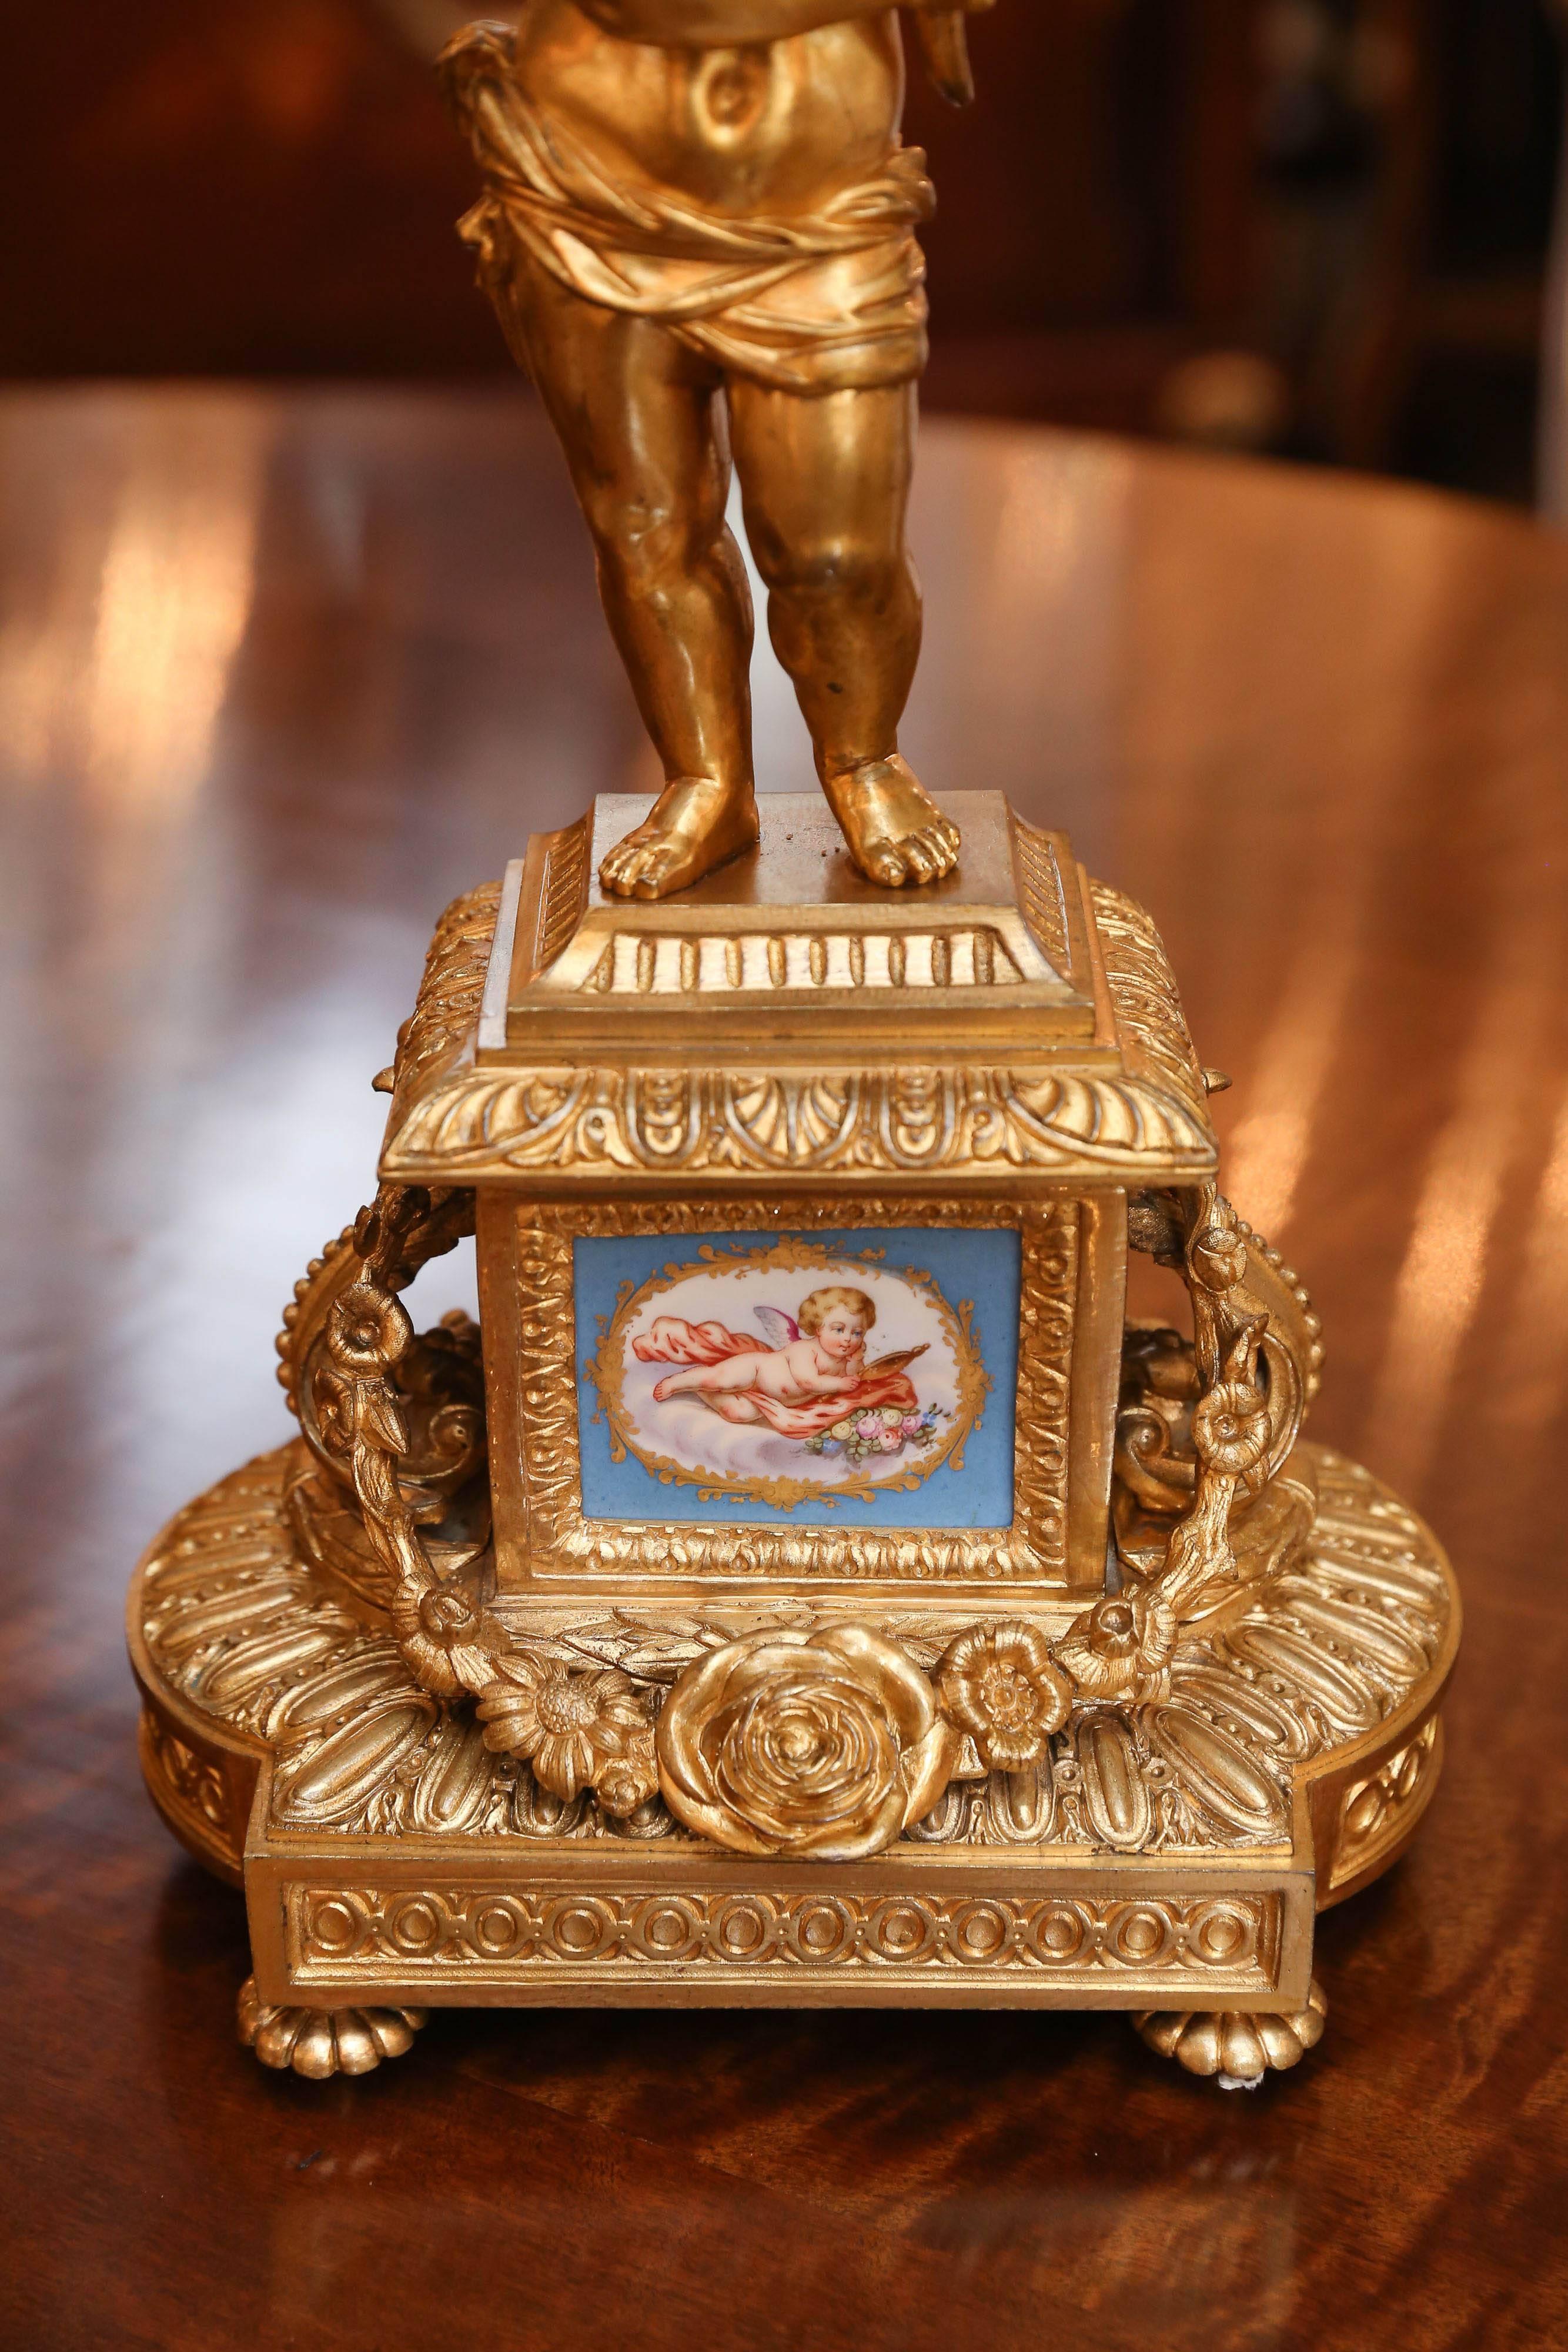 Beautiful pair of doré bronze candelabrum, 19th century. Putto holding
The candelabrum each with six candleholders. Sevres style  porcelain mounts
In Celeste blue.